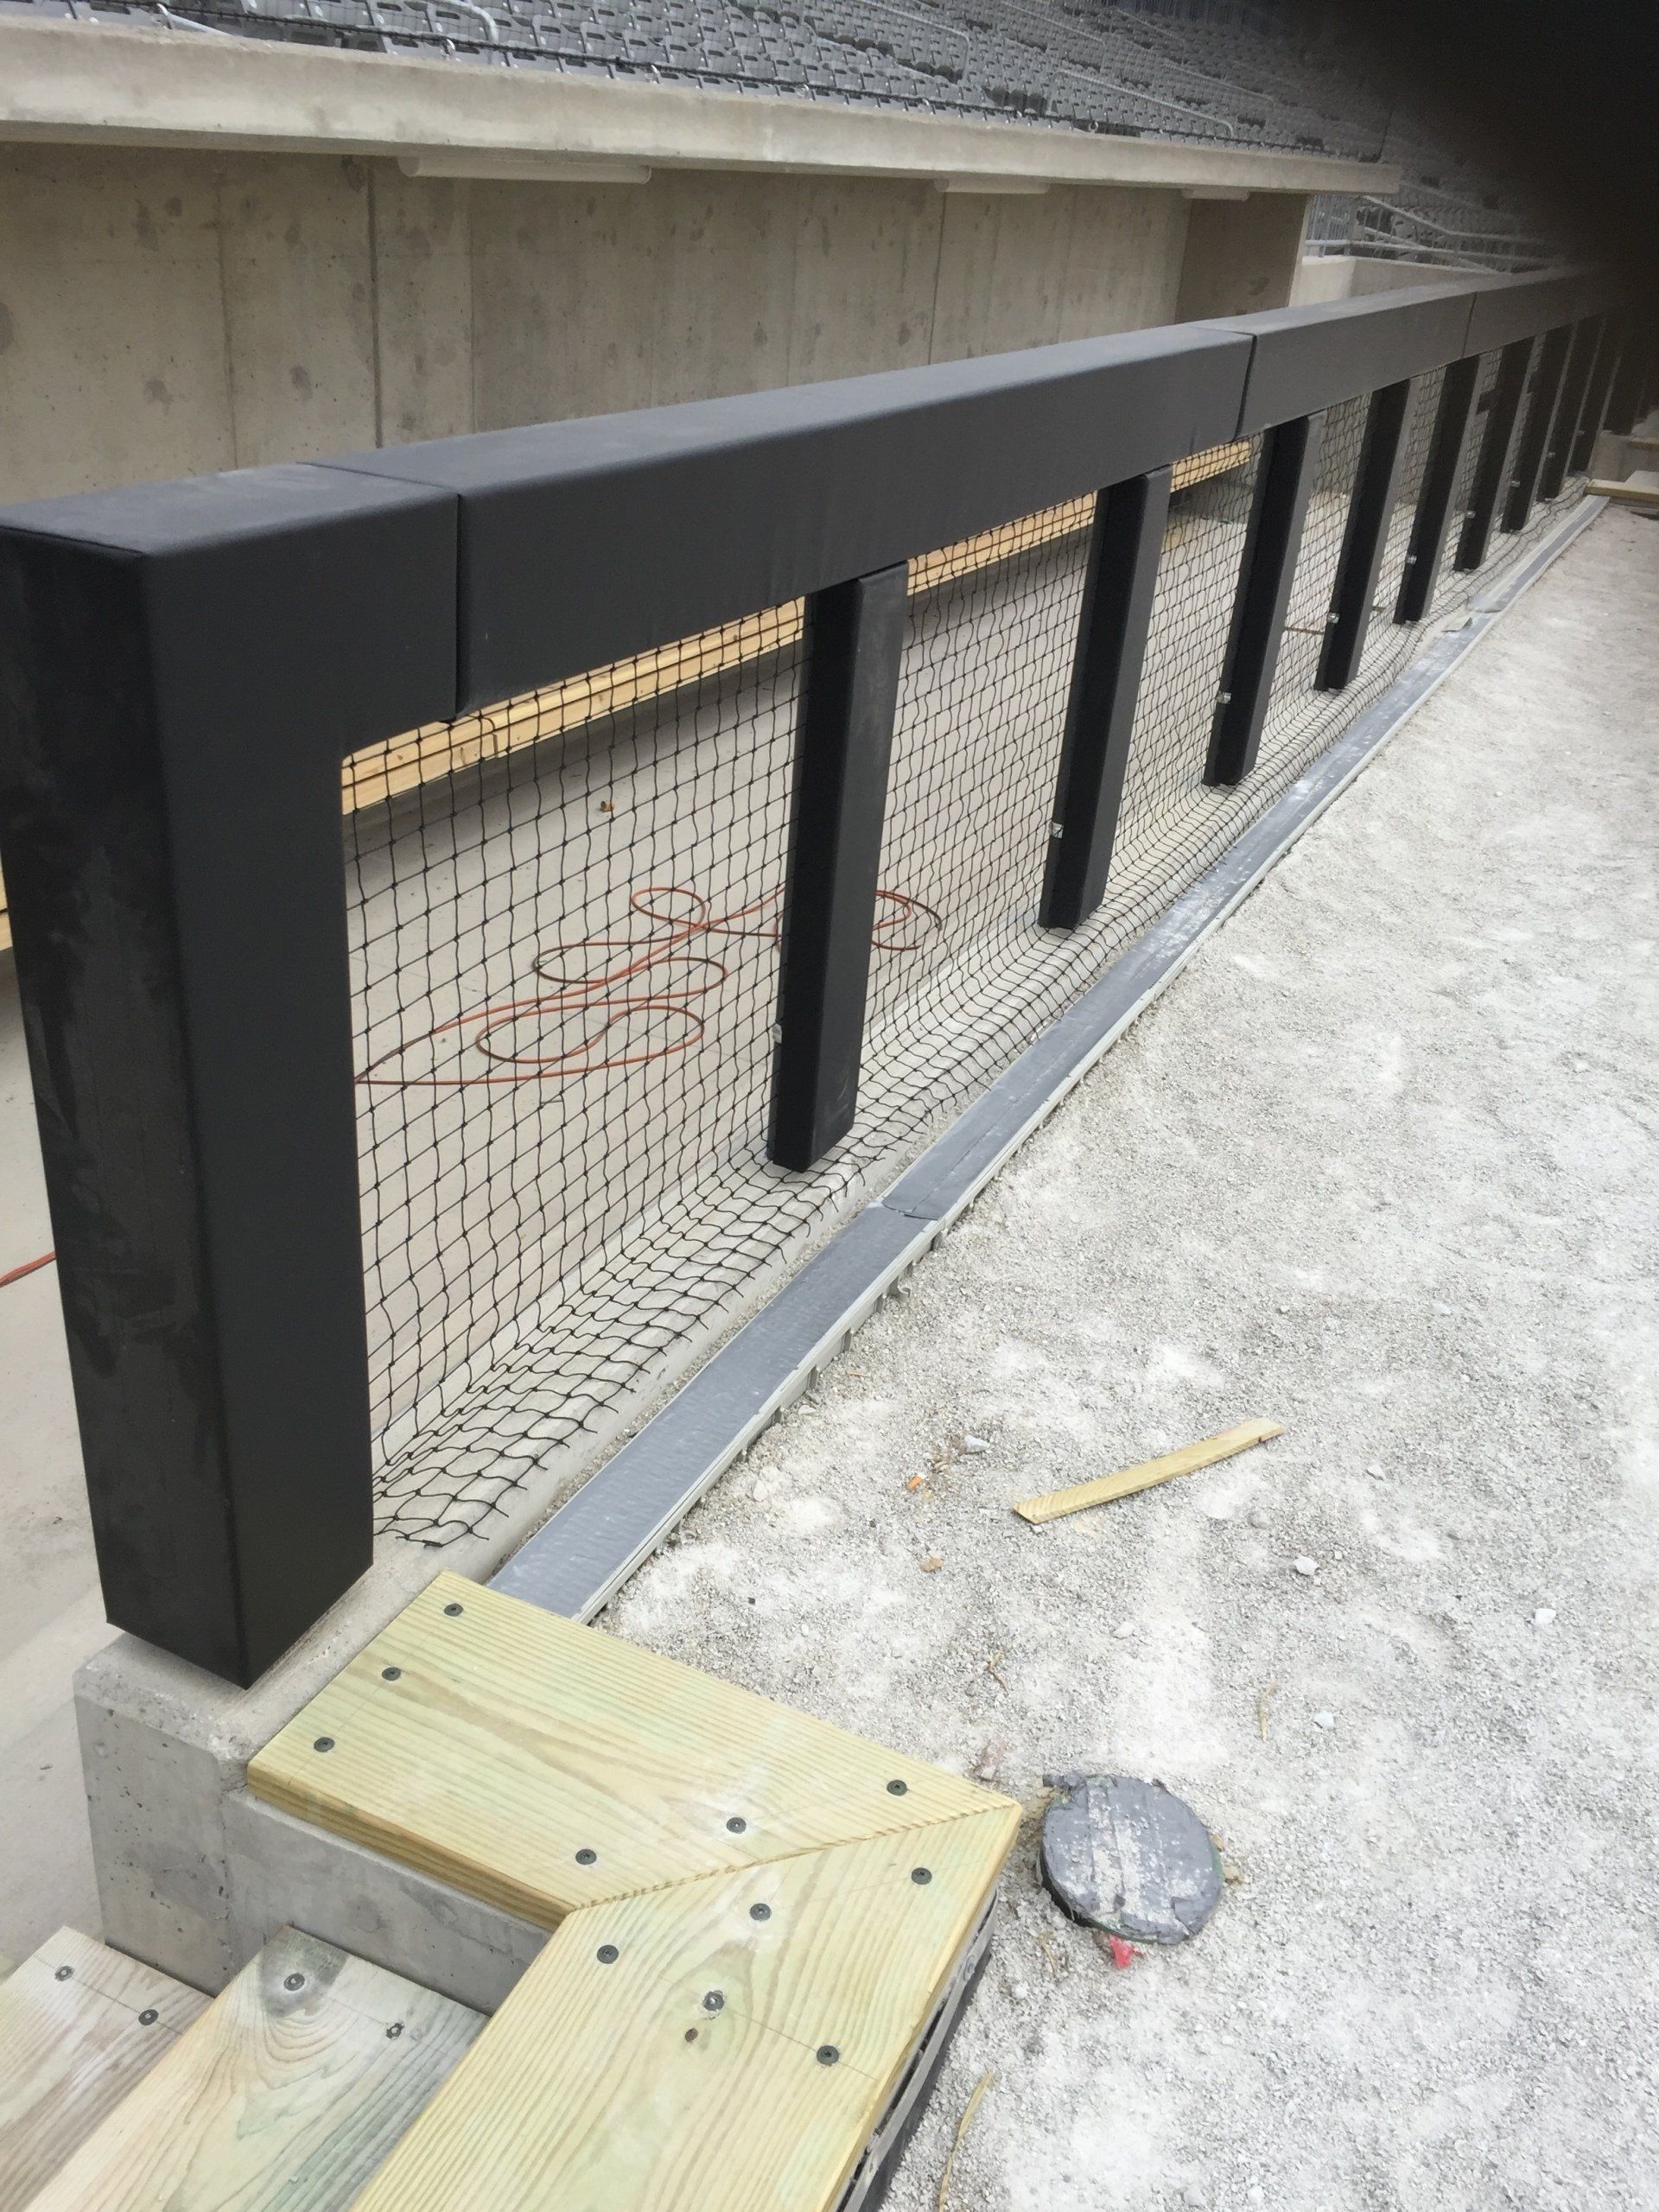 A black railing is being built on top of a wooden deck